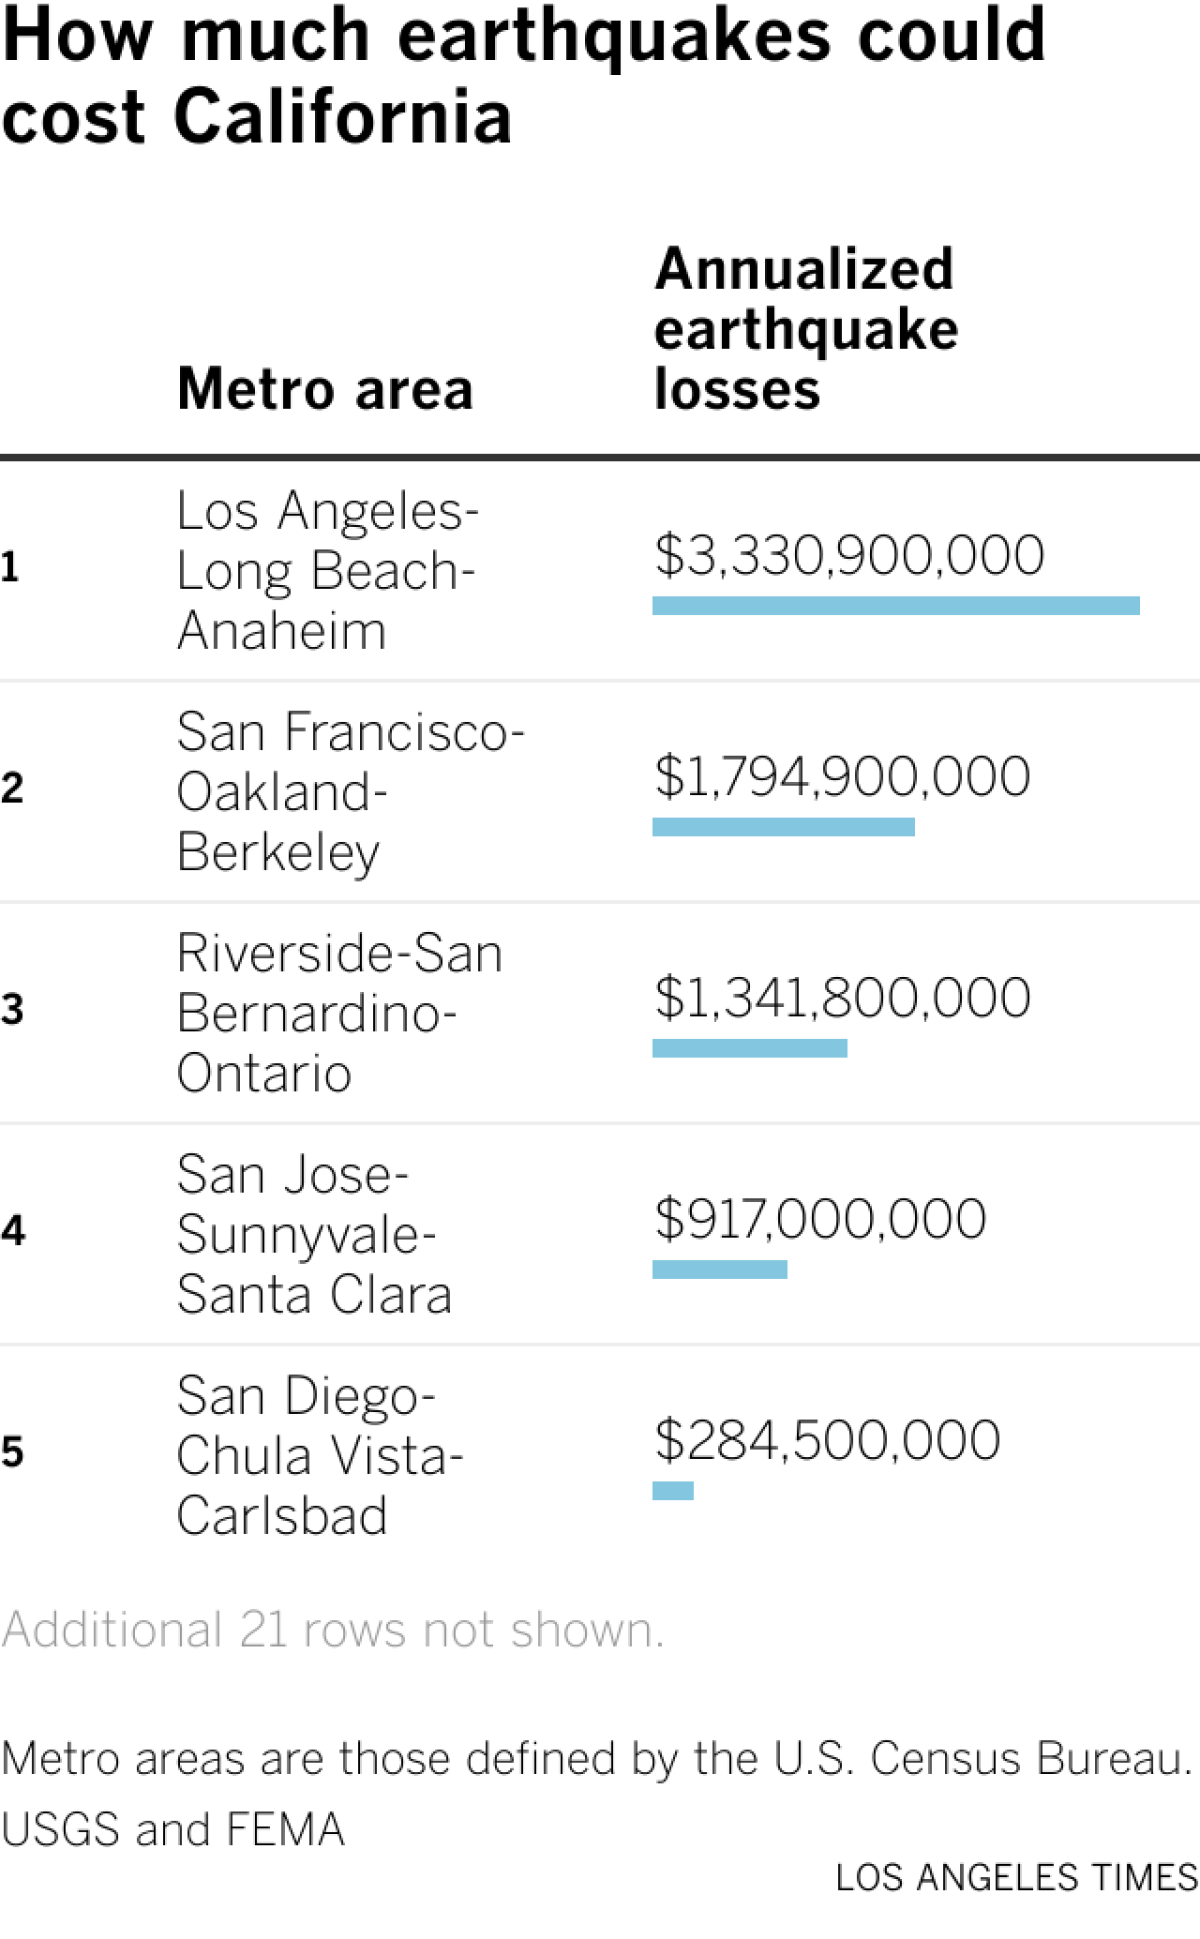 This chart shows how much earthquakes cost California on an annualized basis. 